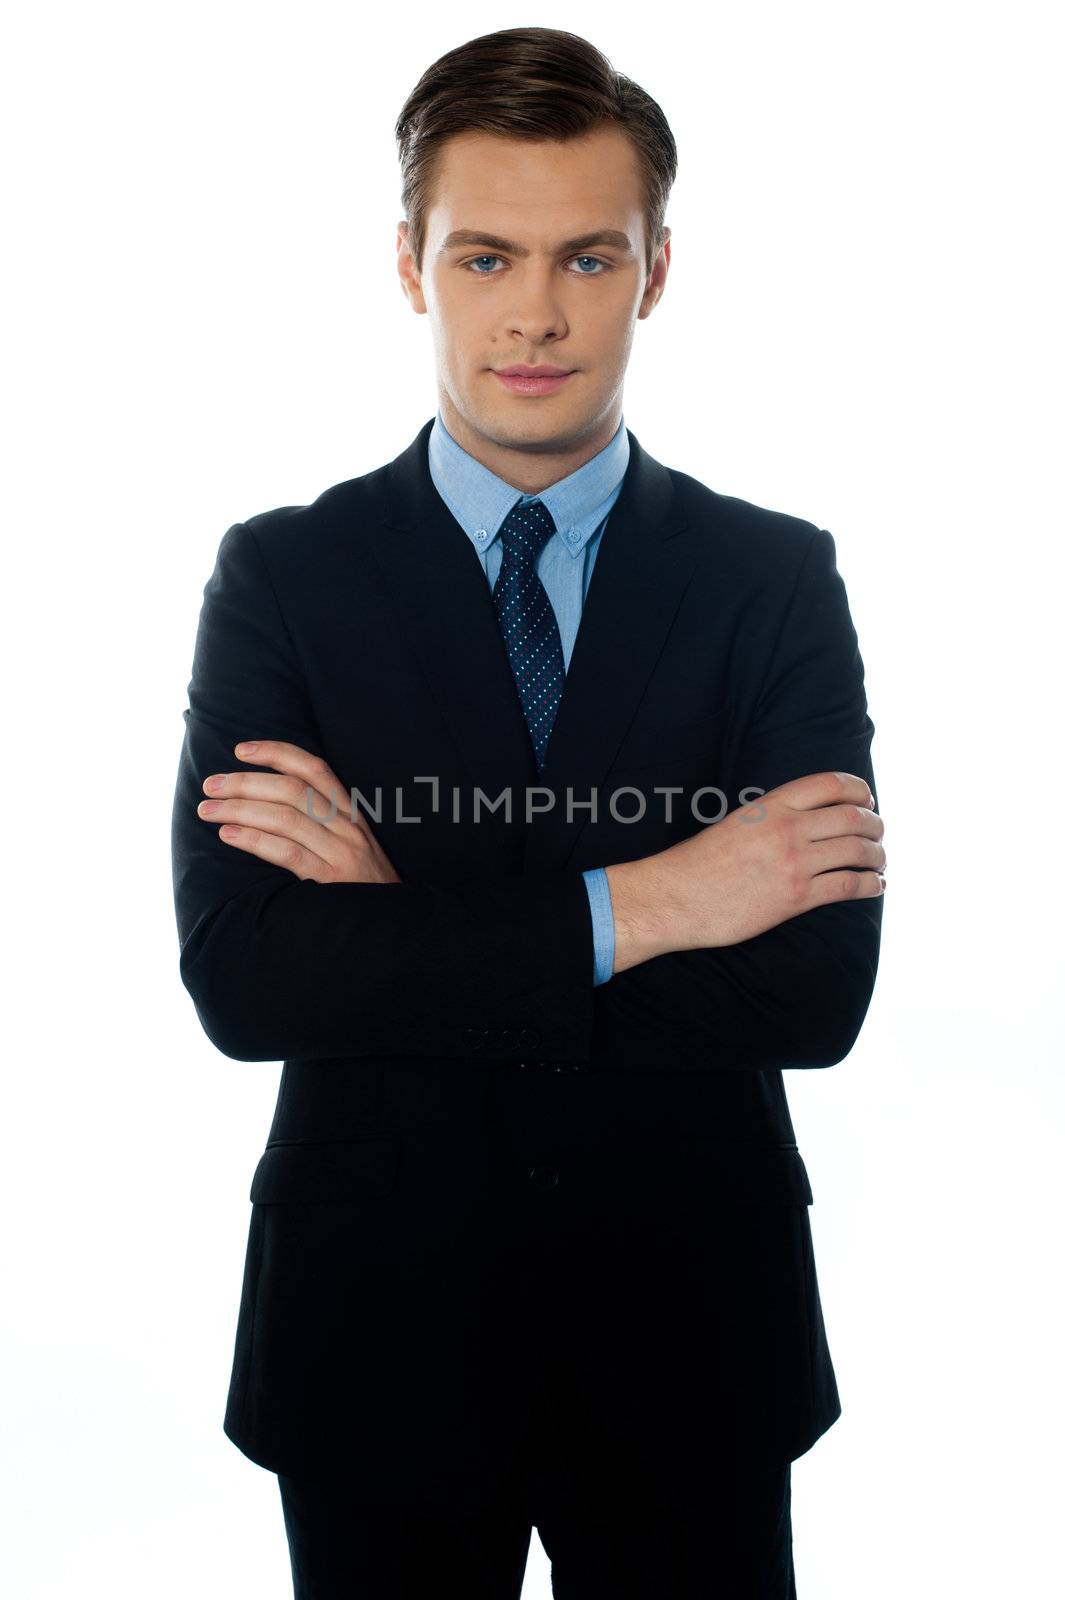 Portrait of a professional business executive by stockyimages